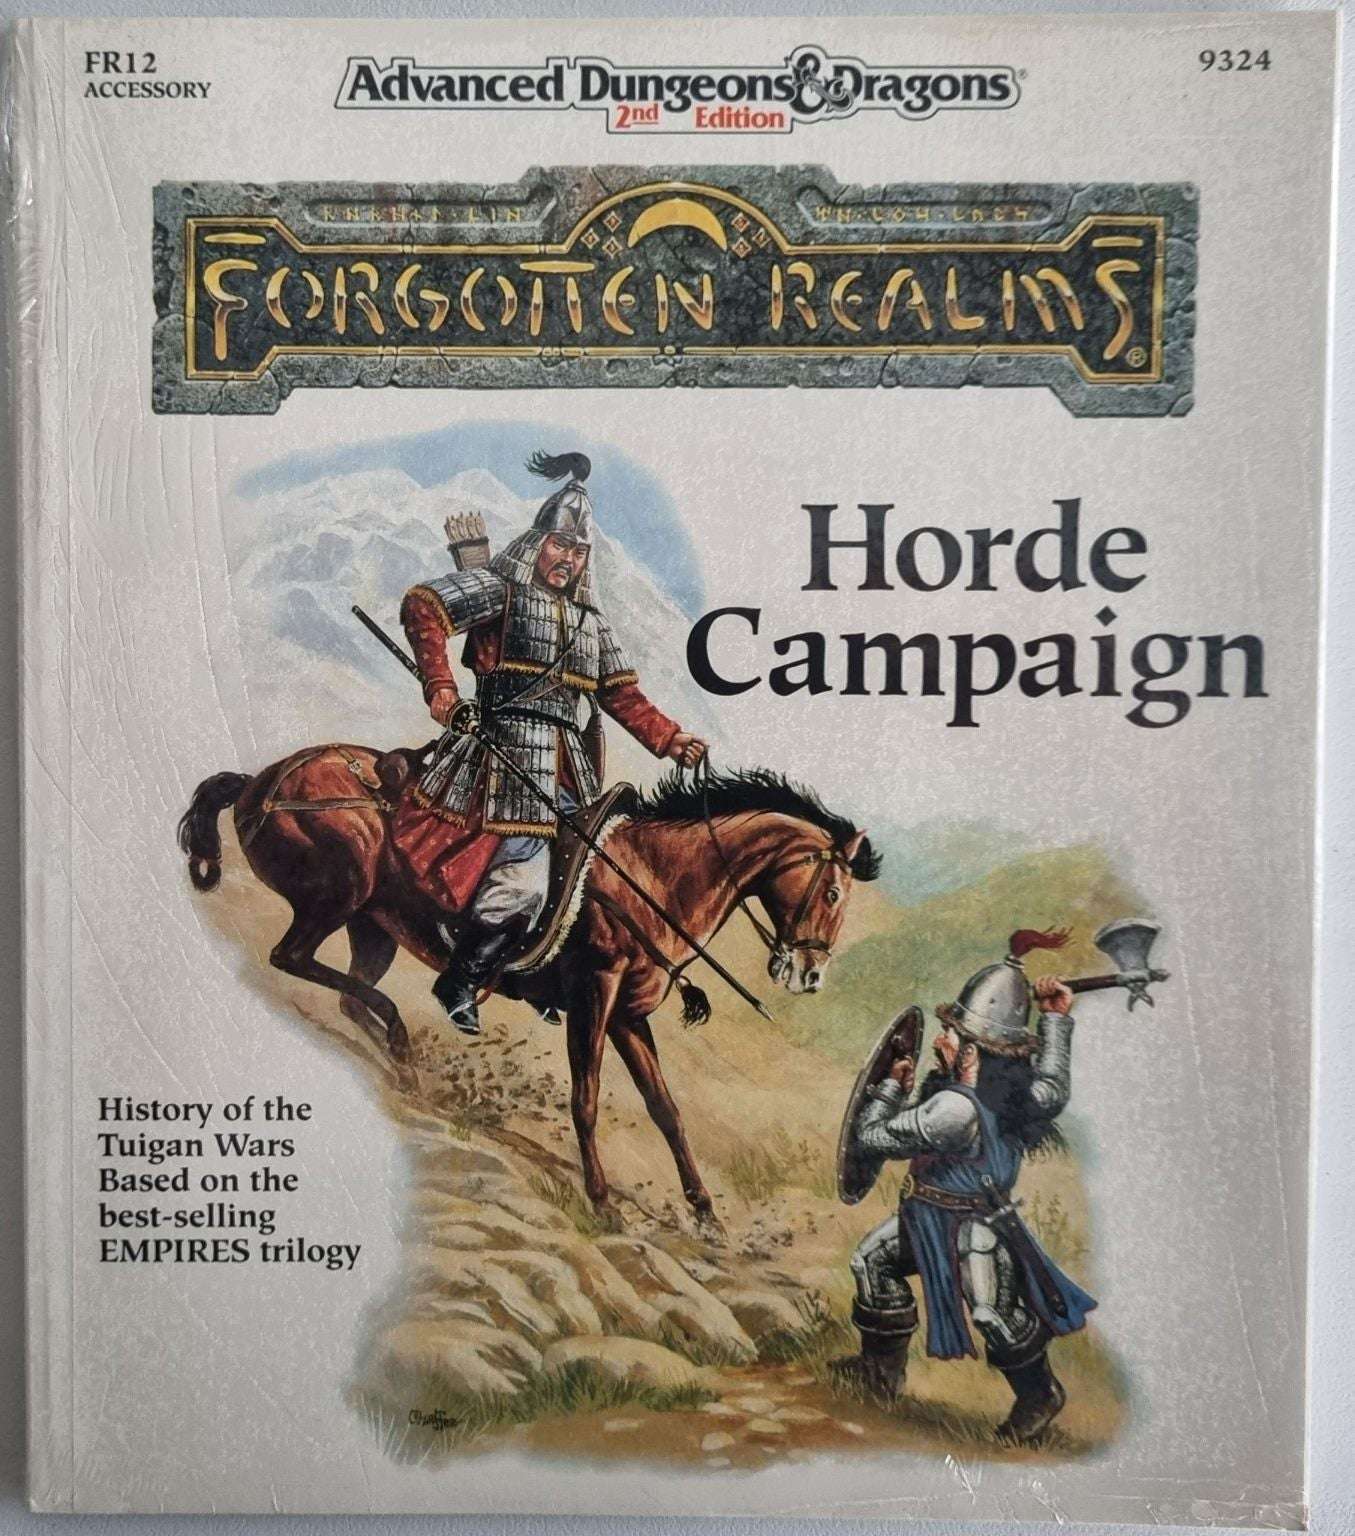 Advanced Dungeons and Dragons - Forgotten Realms - Horde Campaign (Sealed) Default Title